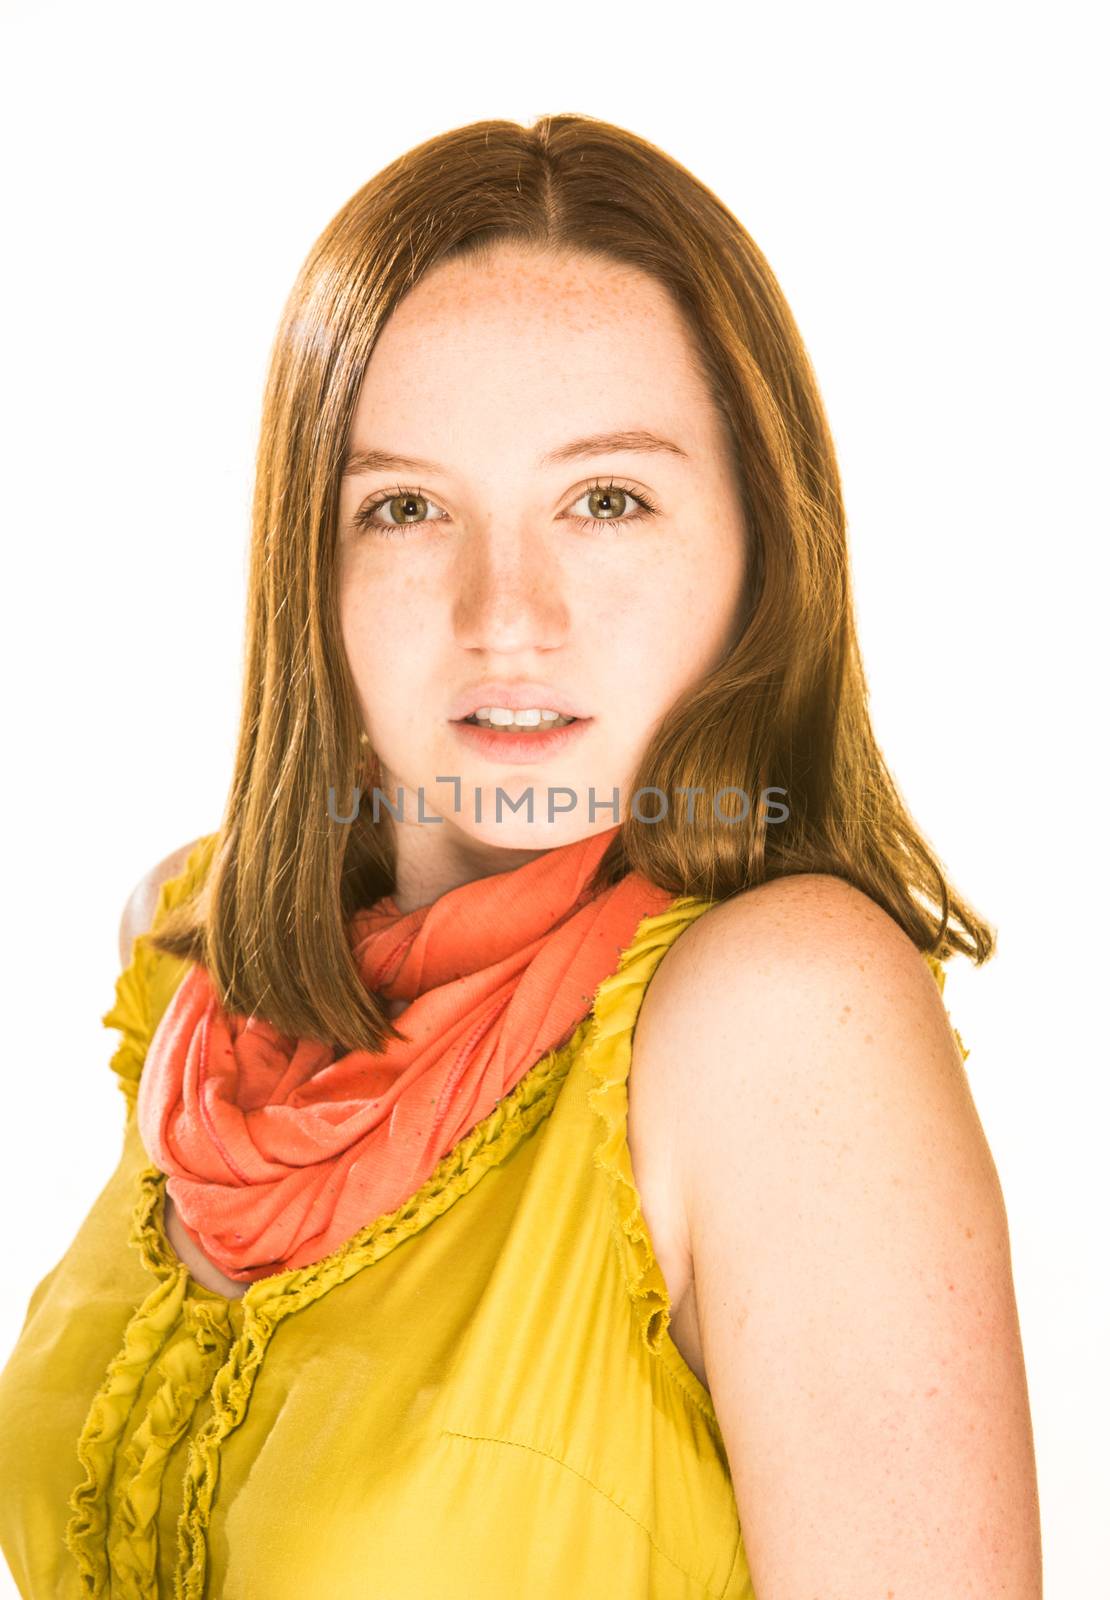 Pretty girl with a seductive expression on white background